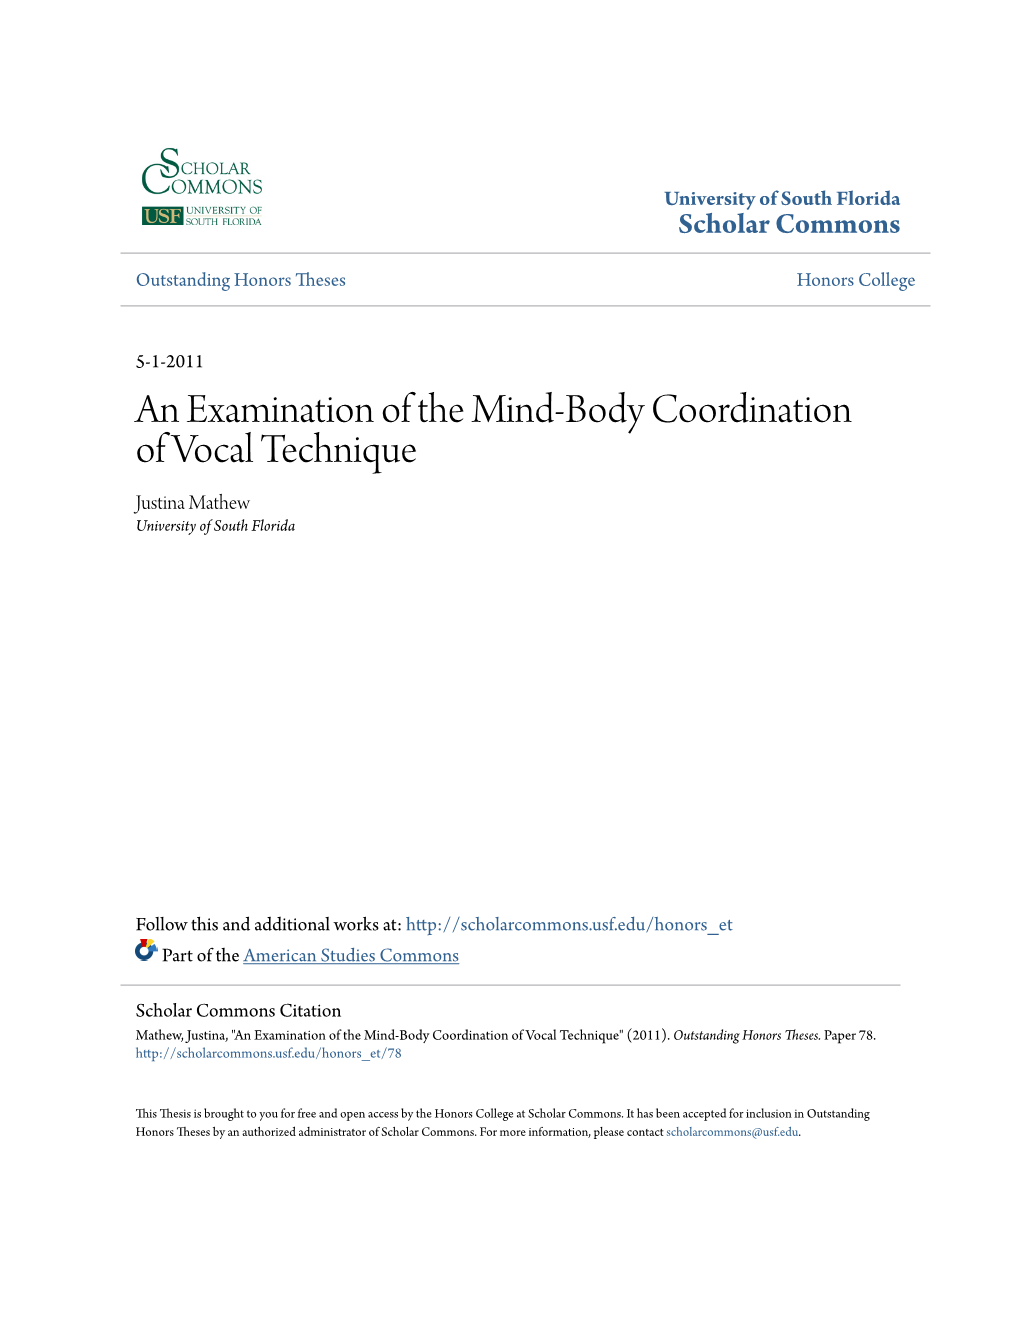 An Examination of the Mind-Body Coordination of Vocal Technique Justina Mathew University of South Florida